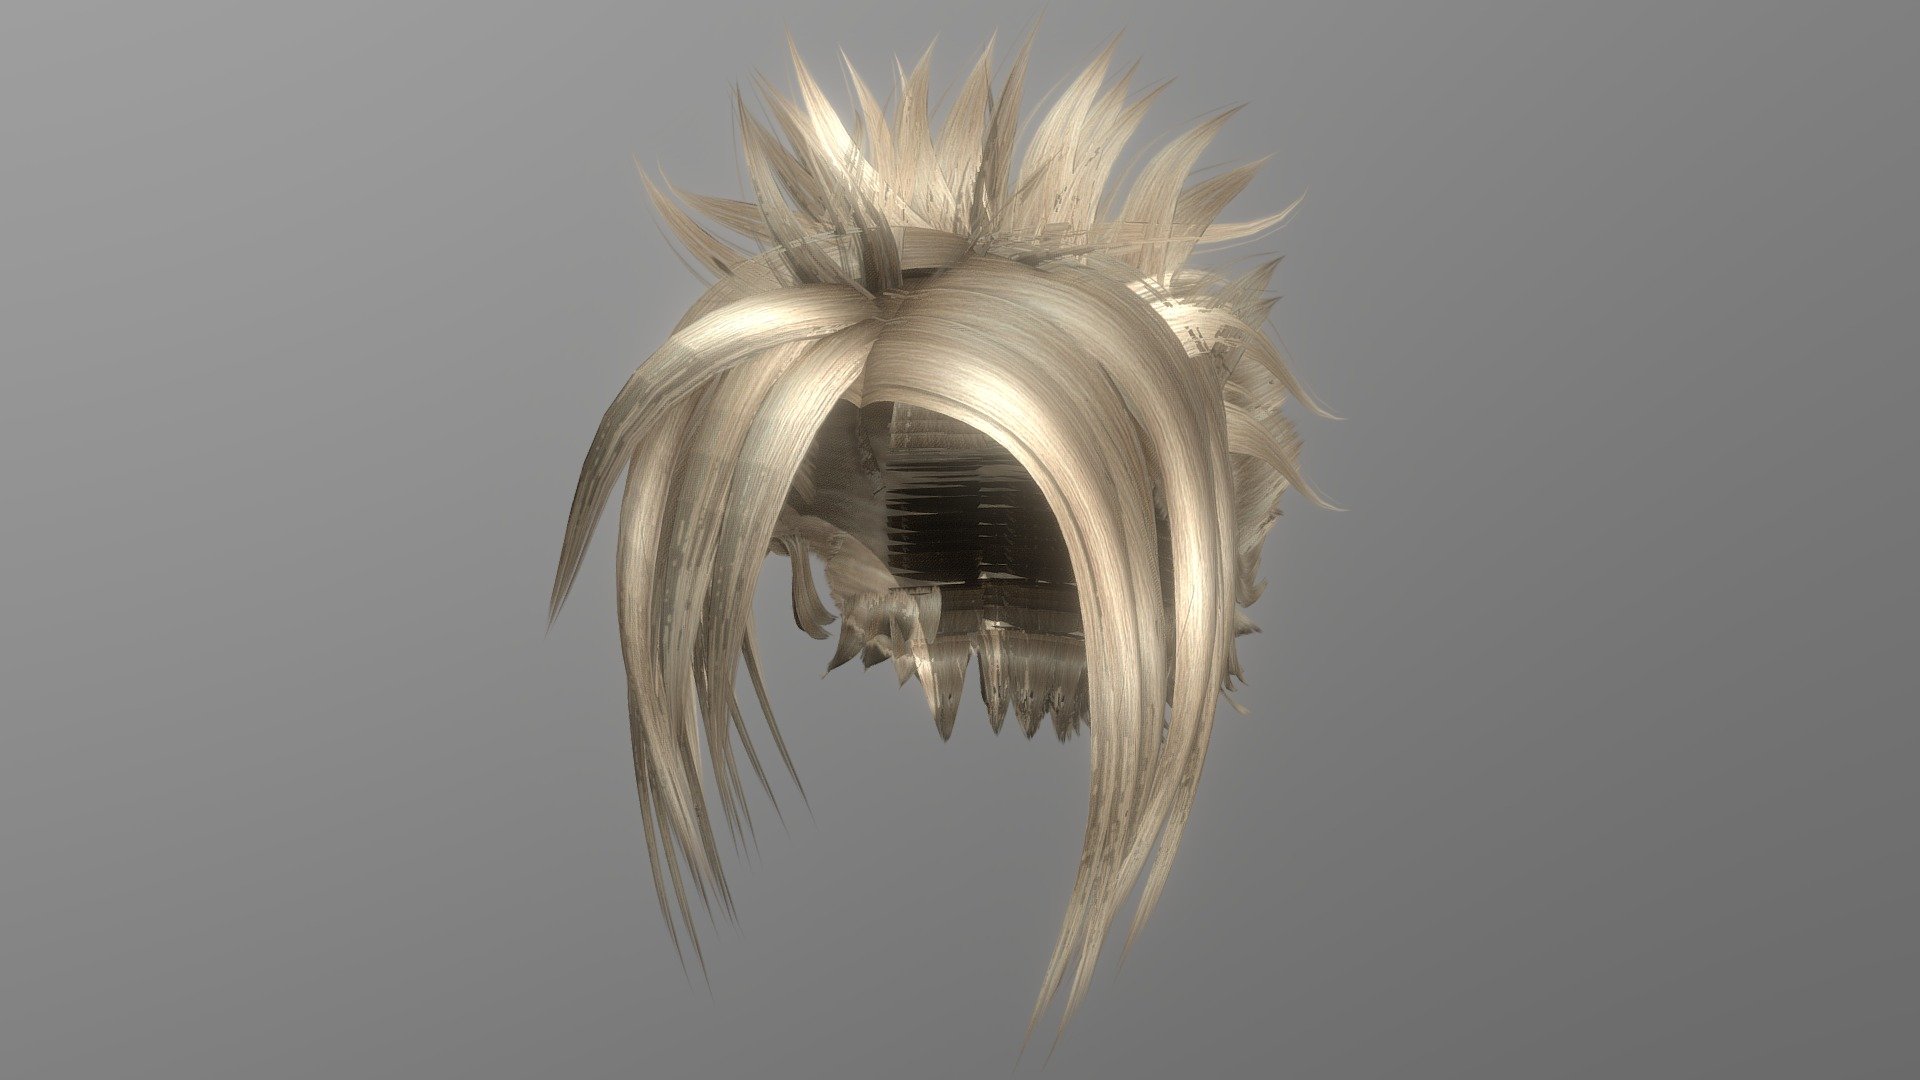 Anime Hair (Light Blonde)
Bring your 3D model of an Anime hairstyle to life with this high-poly design. Perfect for use in games, animations, VR, AR, and more, this model is optimized for performance and still retains a high level of detail.


Features



High poly design with 123,262 vertices

233,886 edges

110,910 faces (polygons)

221,820 tris

2k PBR Textures and materials

File formats included: .obj, .fbx, .dae


Tools Used
This Anime hairstyle 3D model was created using Blender 3.3.1, a popular and versatile 3D creation software.


Availability
This high-poly Anime hairstyle 3D model is ready for use and available for purchase. Bring your project to the next level with this high-quality and optimized model 3d model